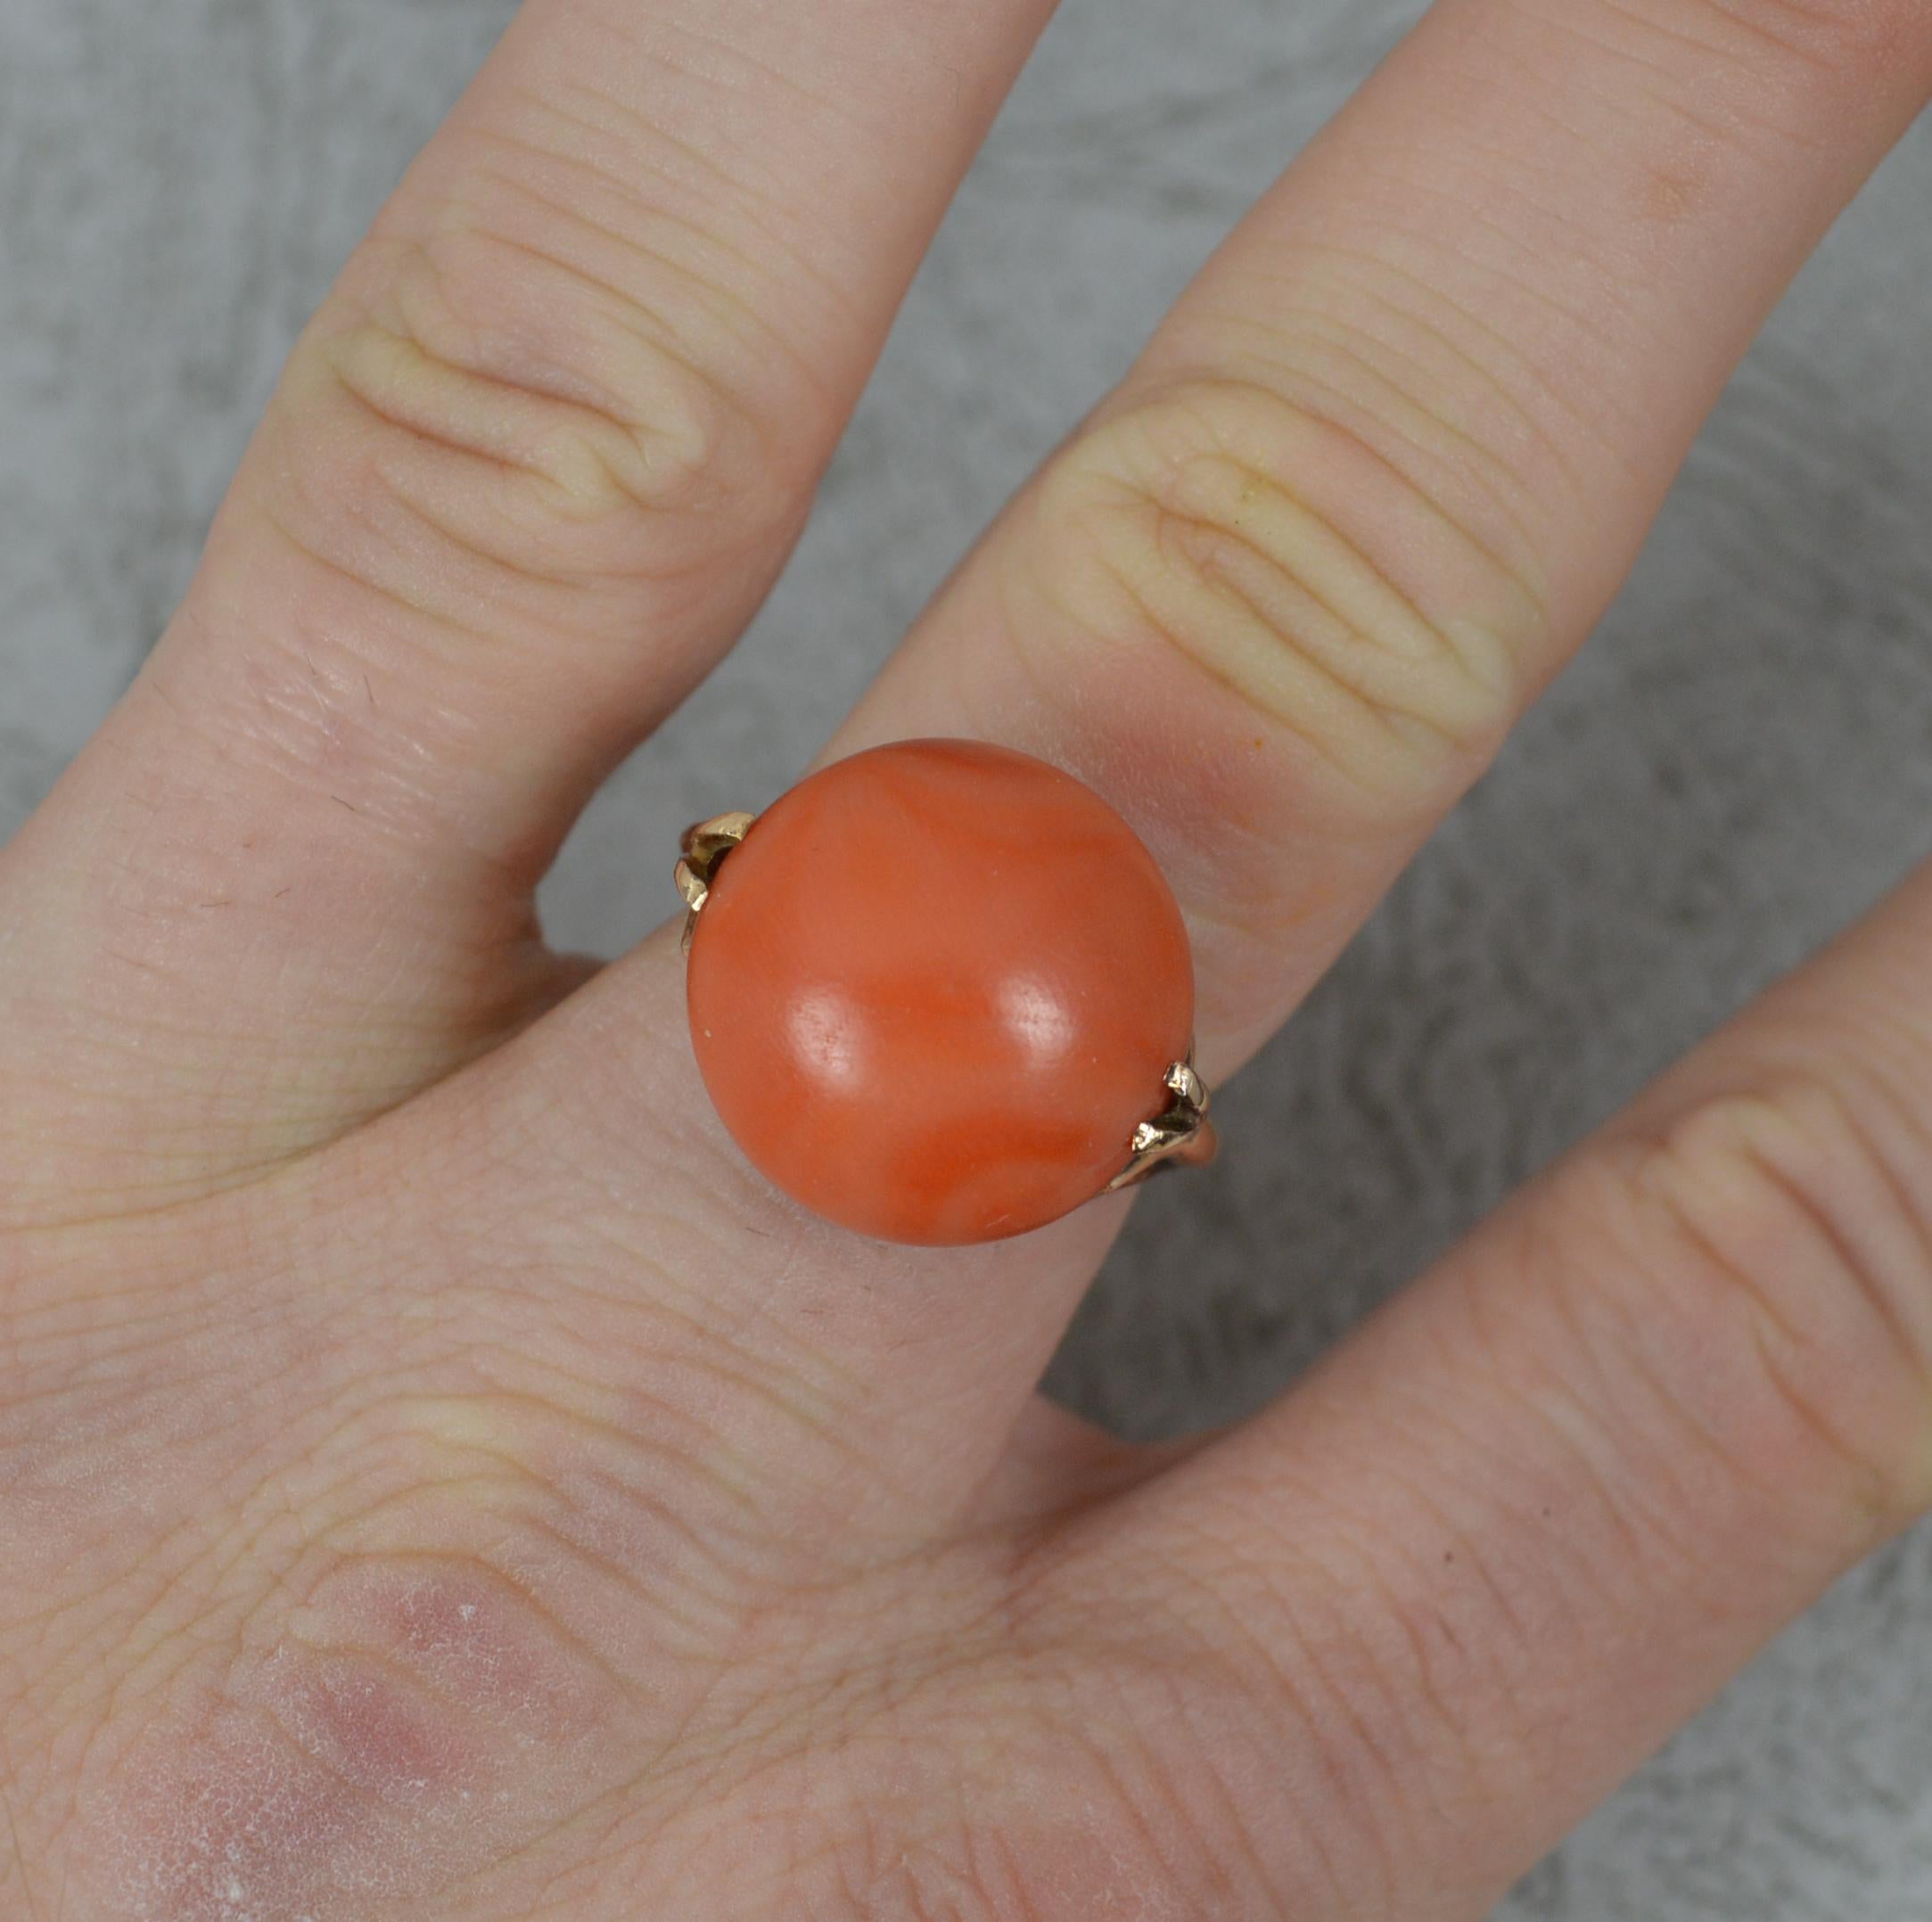 A large vintage statement ring.
Solid 14 carat gold example with double claw settings.
Set with a single, circular shaped piece of coral to centre. 16mm x 16mm x 11mm coral. 

CONDITION ; Excellent. A strong, solid band. Issue free diamonds, well